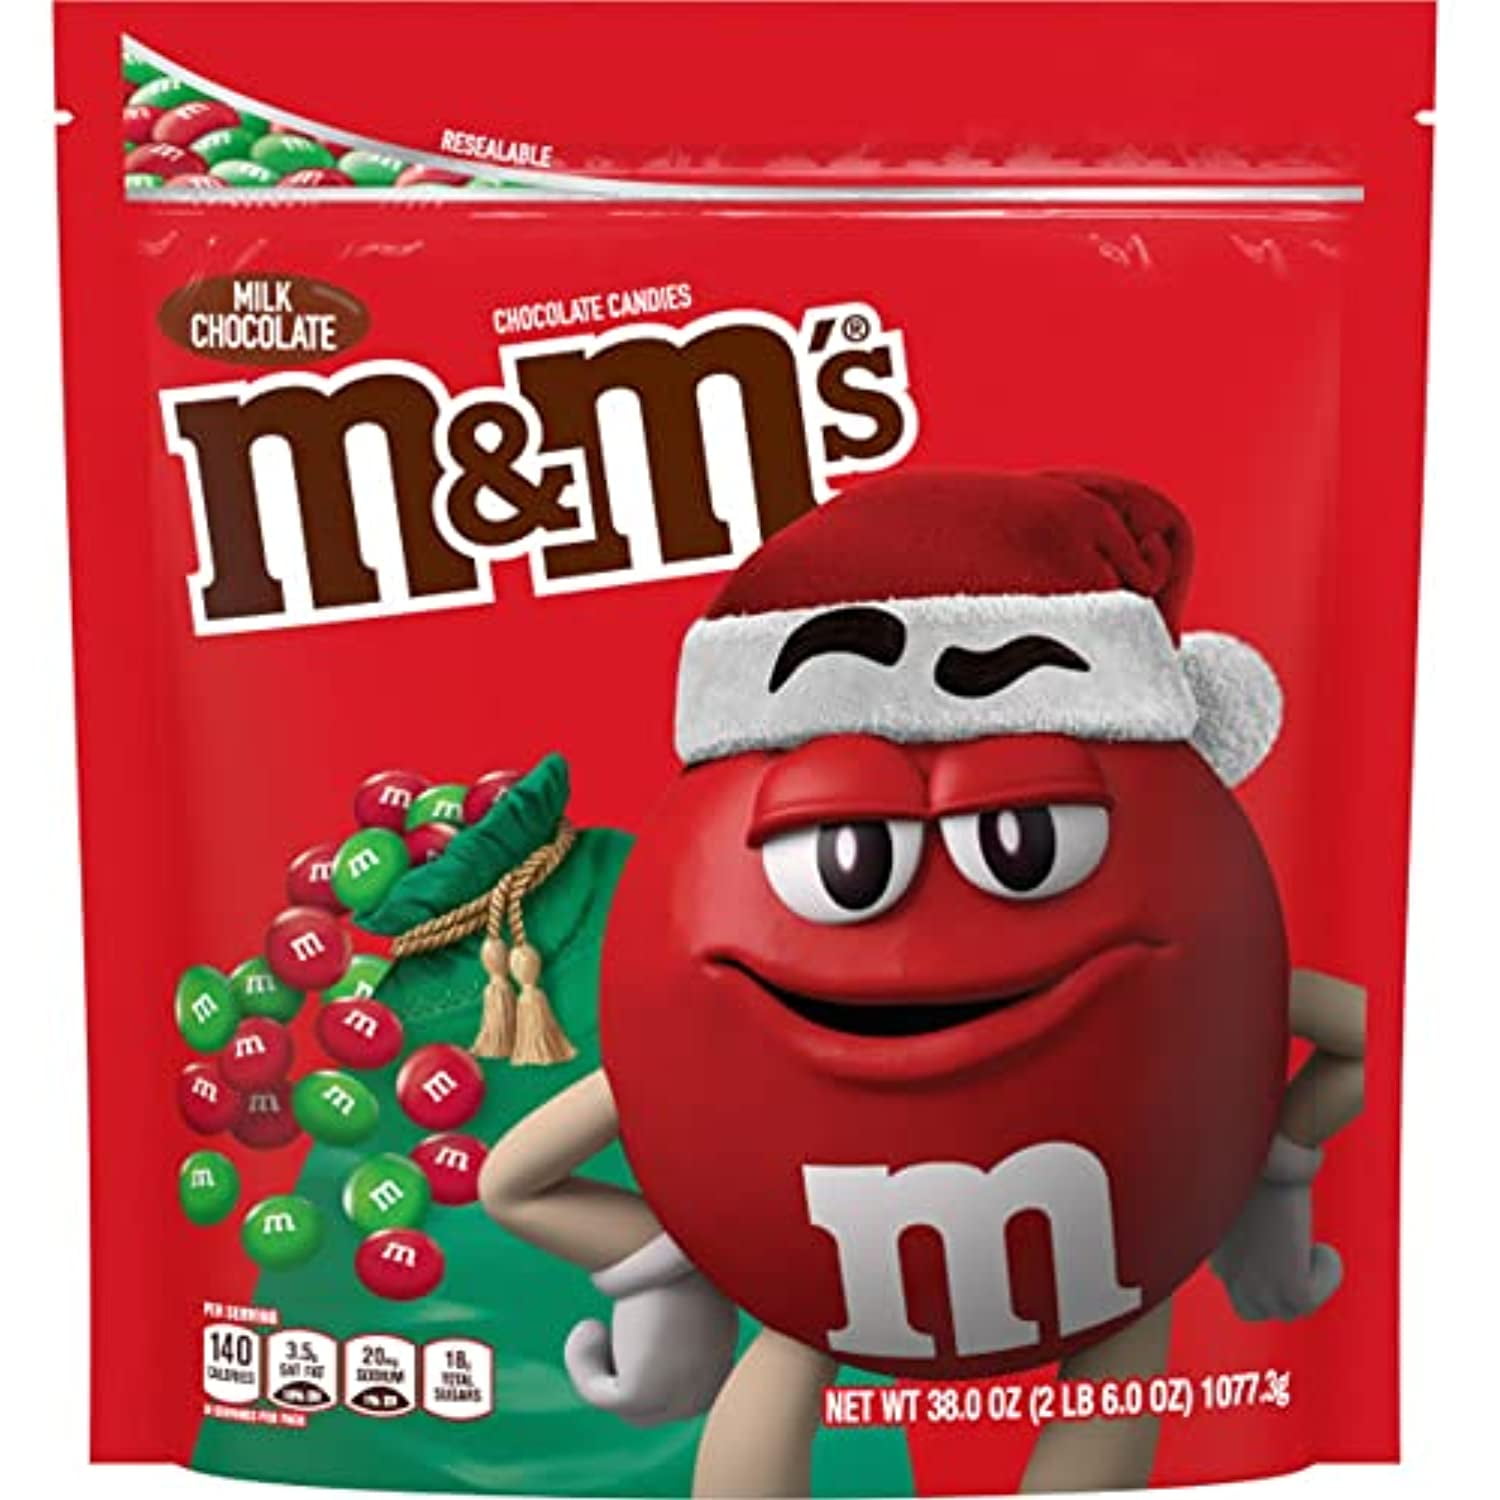 M&M's Limited Edition Milk Chocolate Candy featuring Purple Candy Party  Size Bulk Bag, 38 oz - City Market